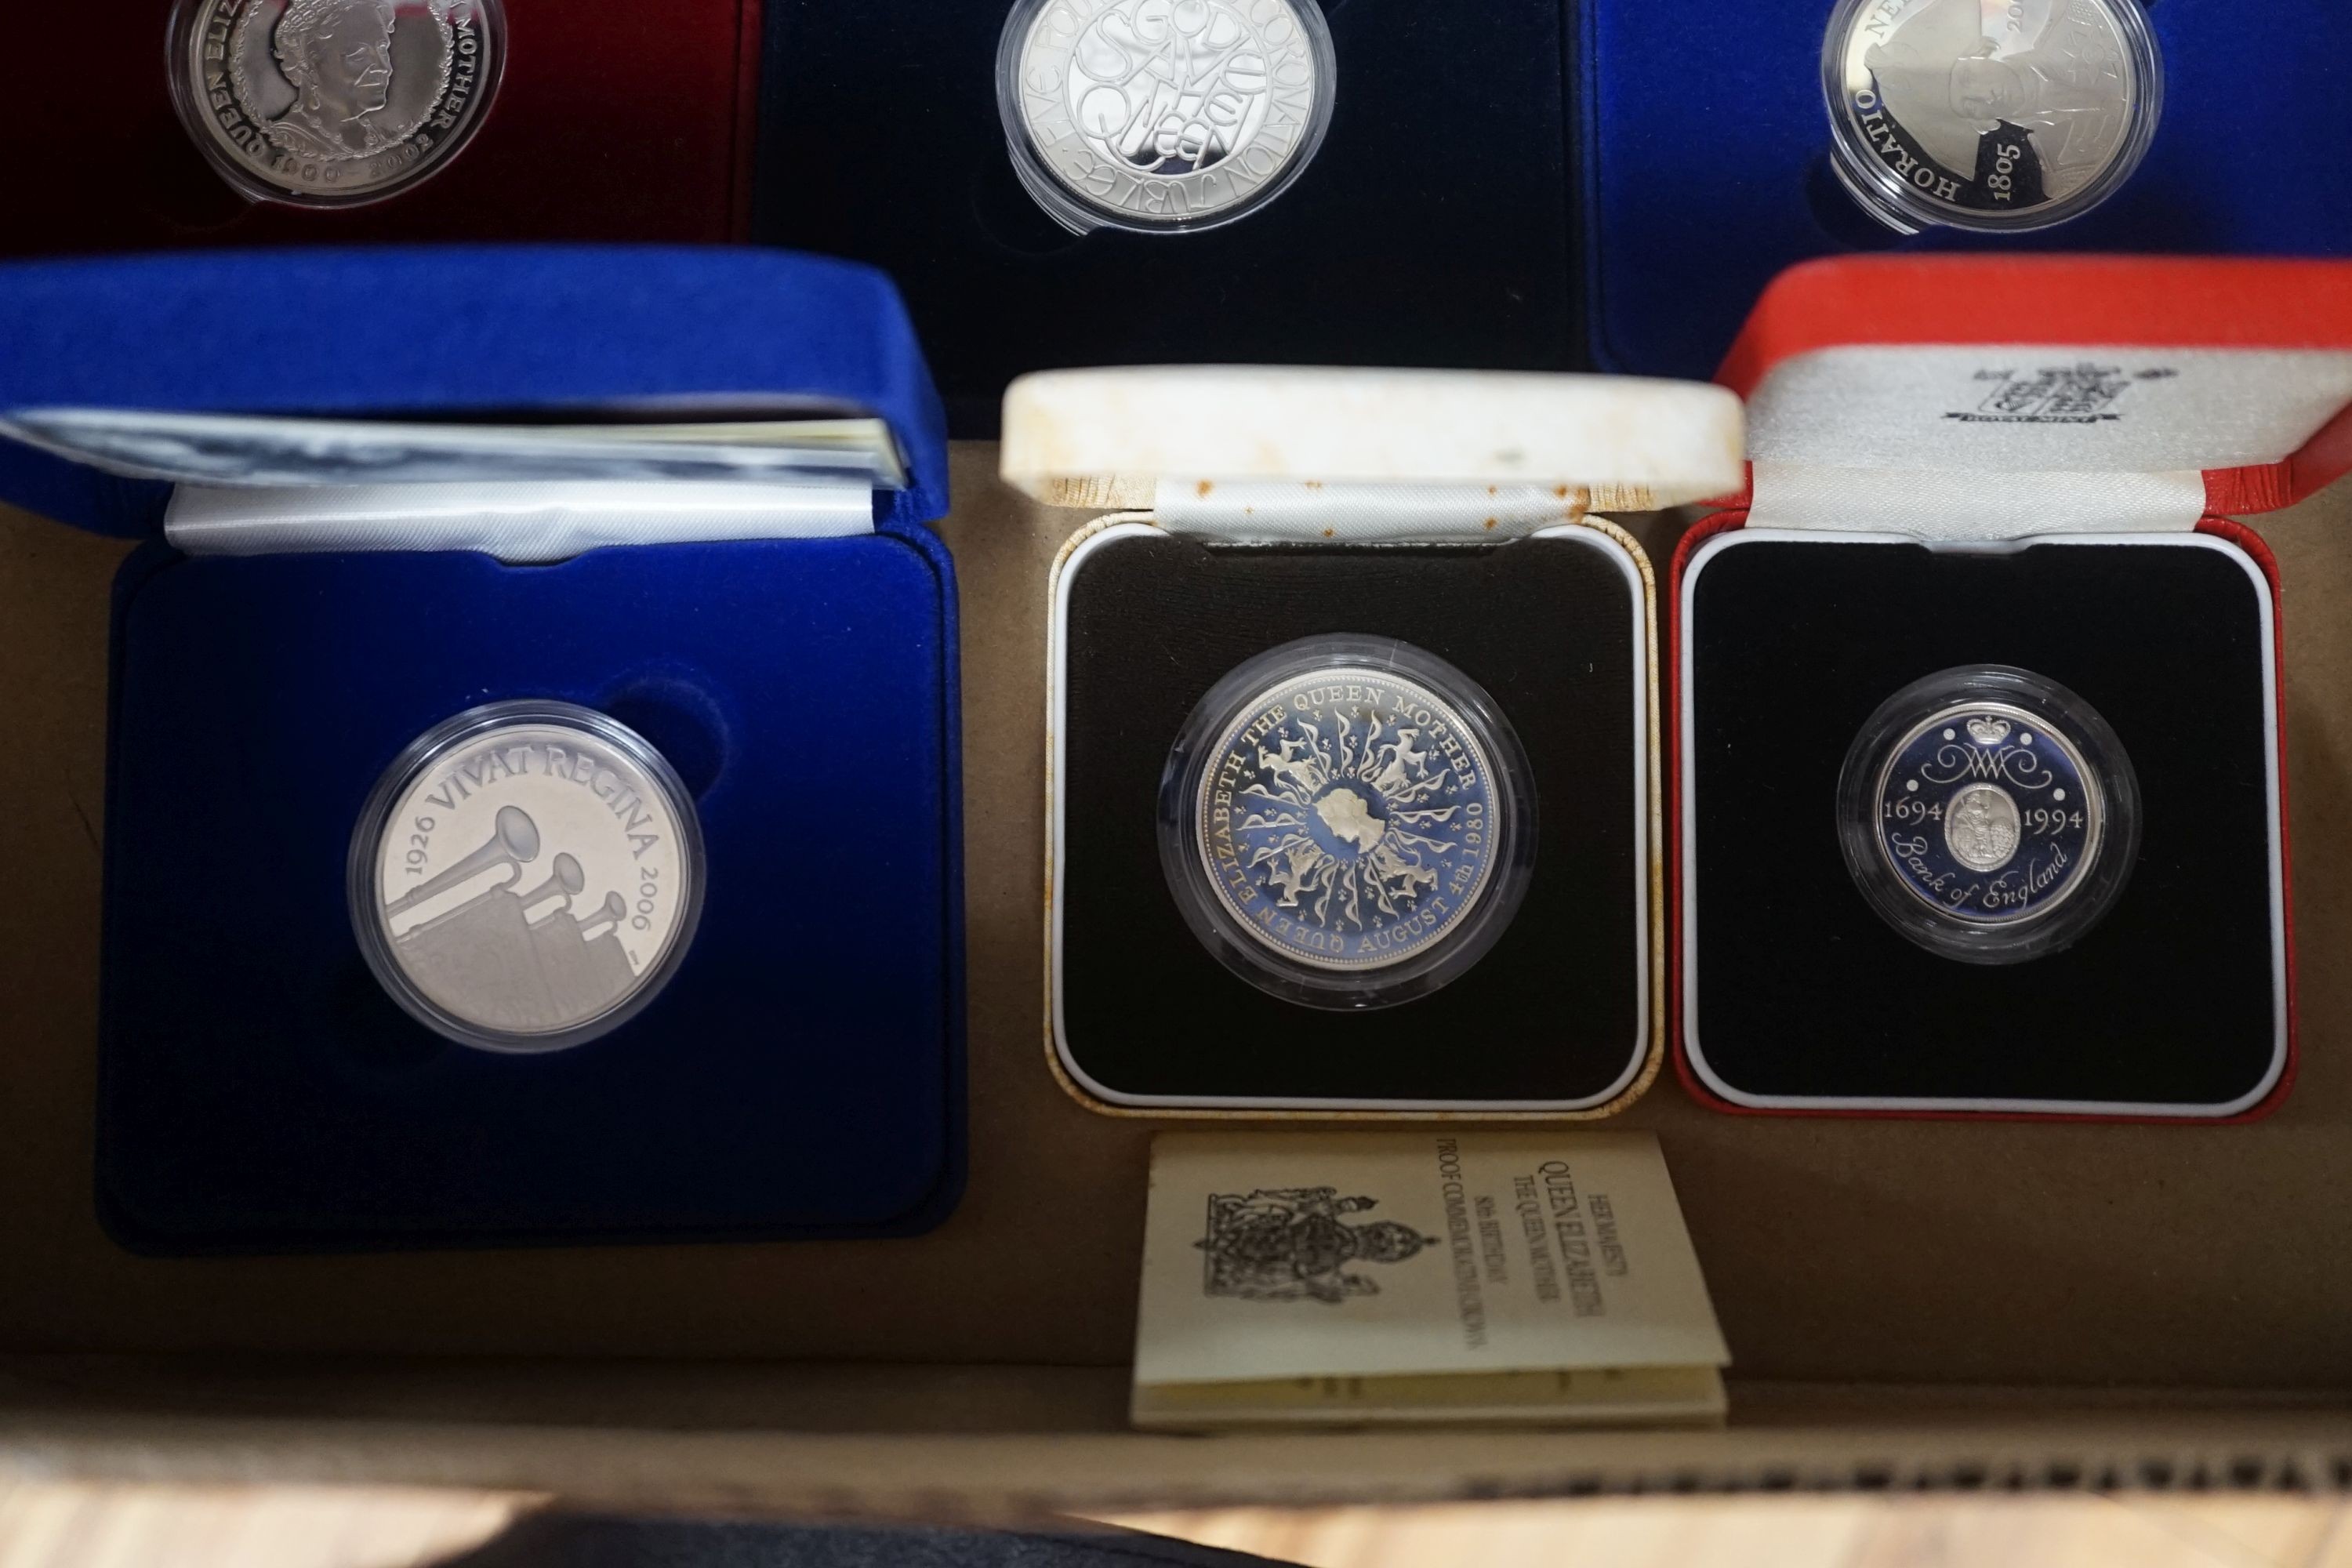 Cased Royal Mint UK silver proof coins – a 2006 1oz. ,Britannia £2, a 2012 QEII Diamond Jubilee £5, 2002 Queen Mother £5, 2003, 2005 and 2006 crowns, a 1980 Queen Mother crown and two piedfort £2 for 1994 and 2004 FIND L